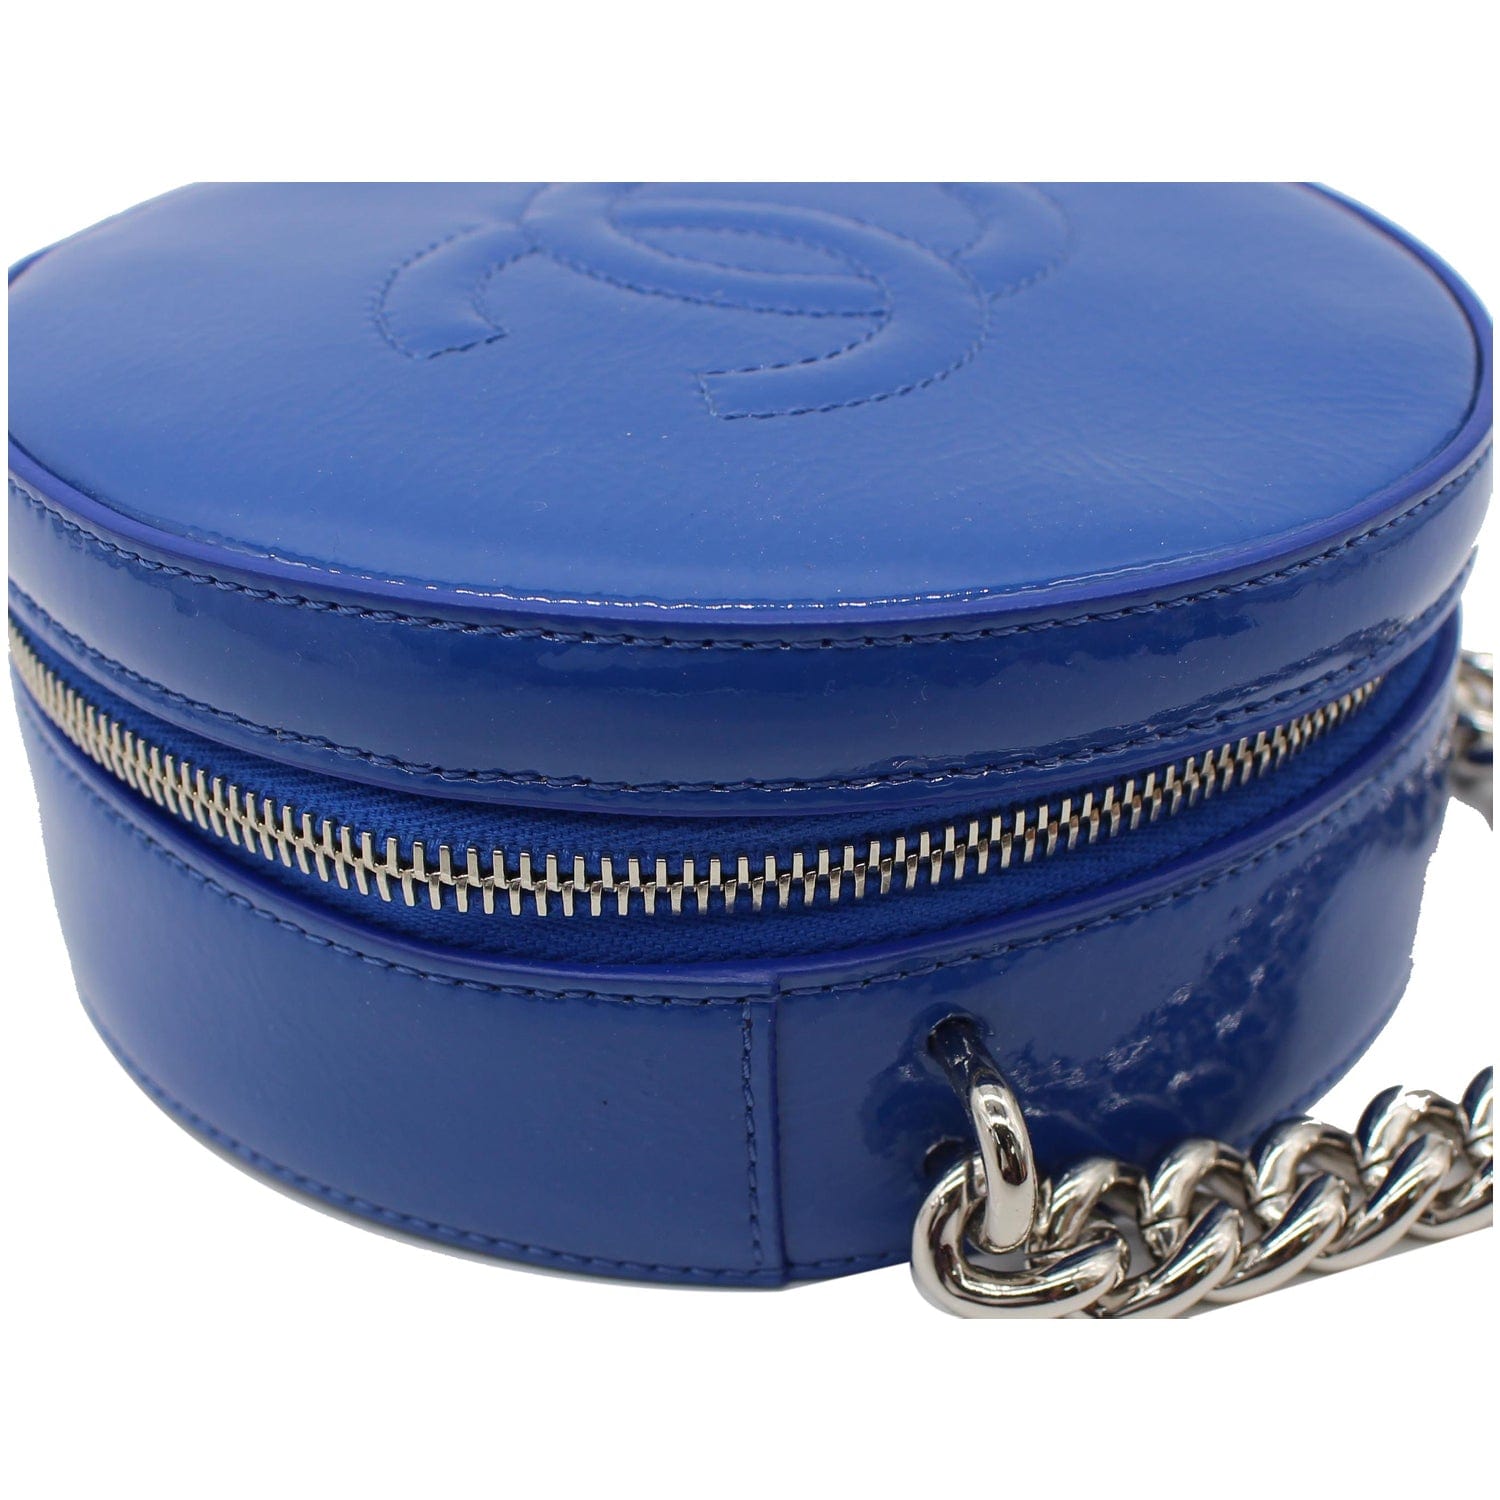 CHANEL Round as Earth Patent Leather Crossbody Bag Blue